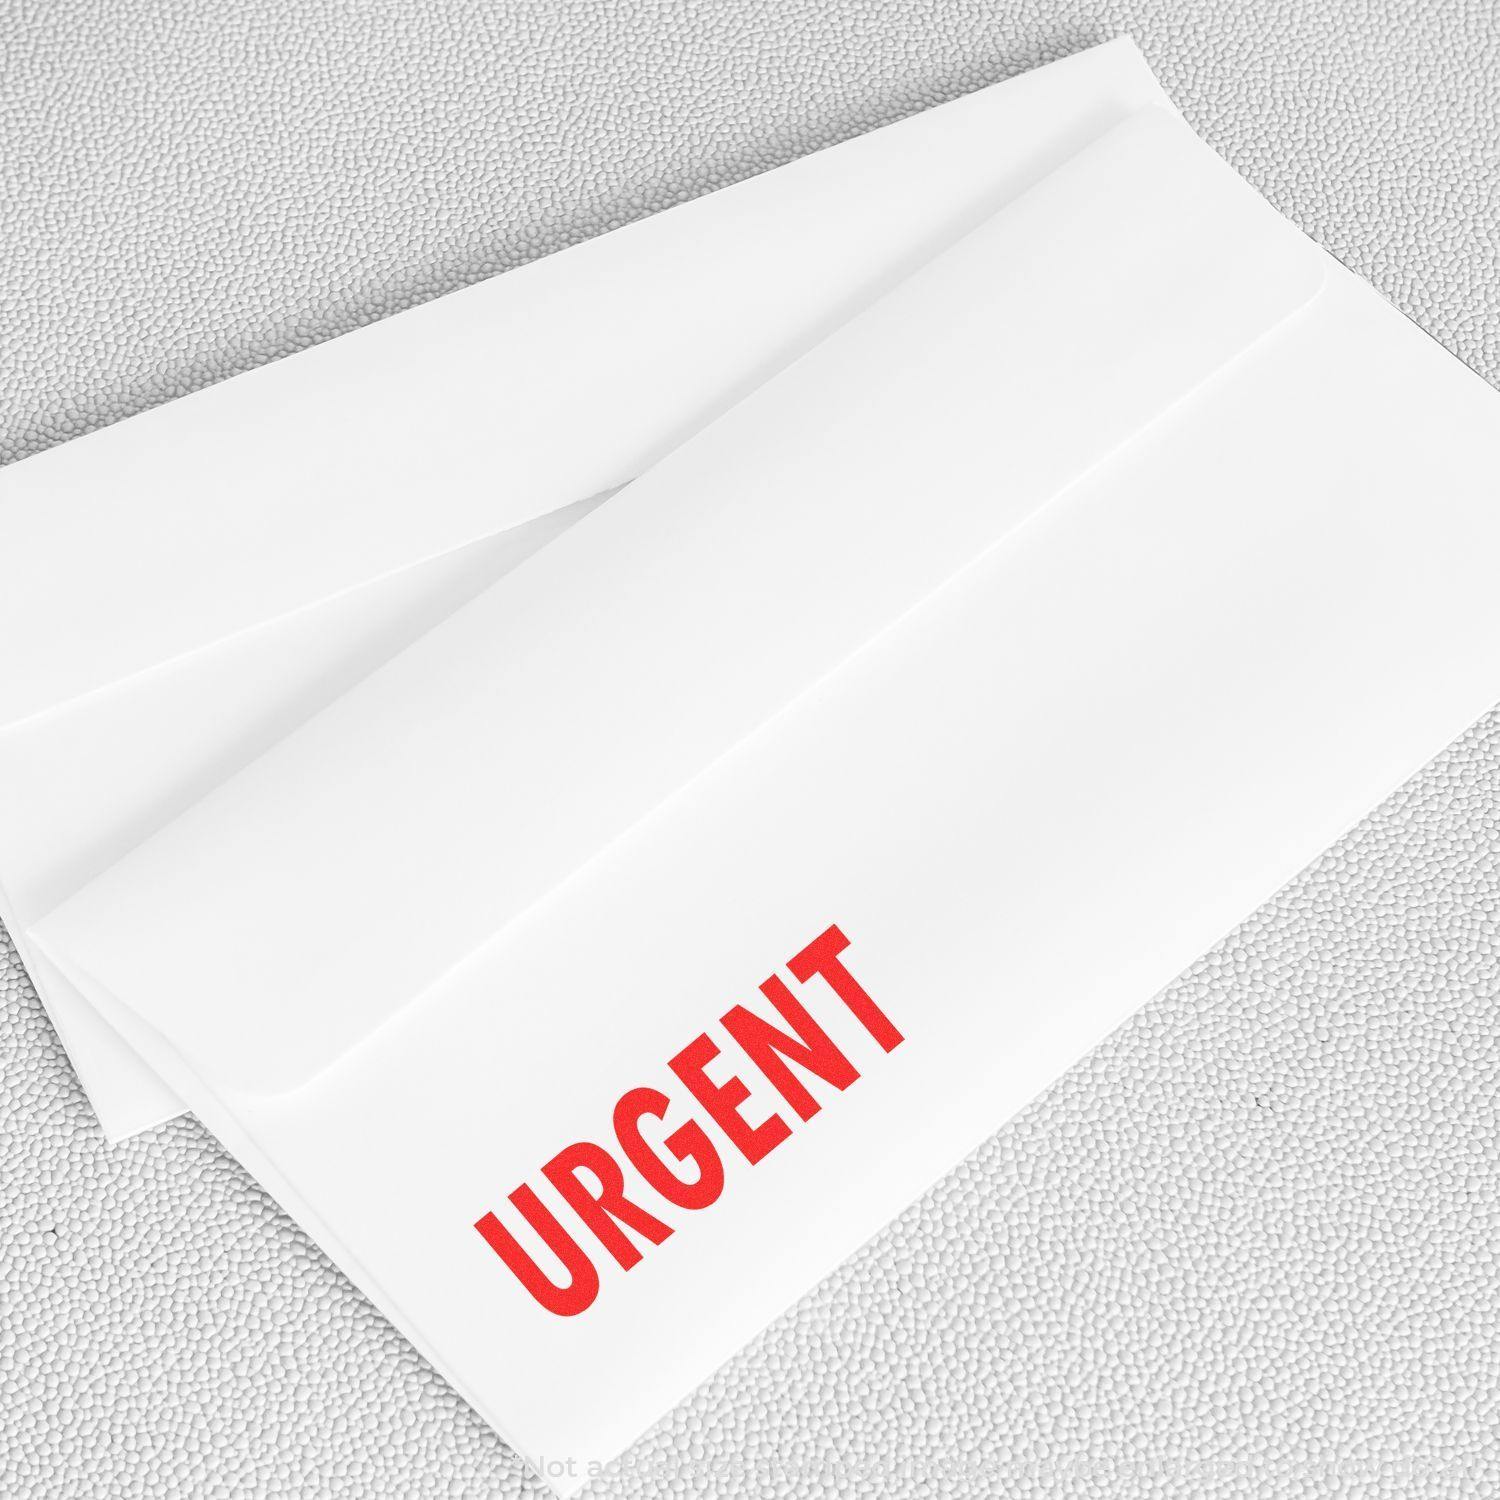 A self-inking stamp with a stamped image showing how the text "URGENT" in a large bold font is displayed by it.